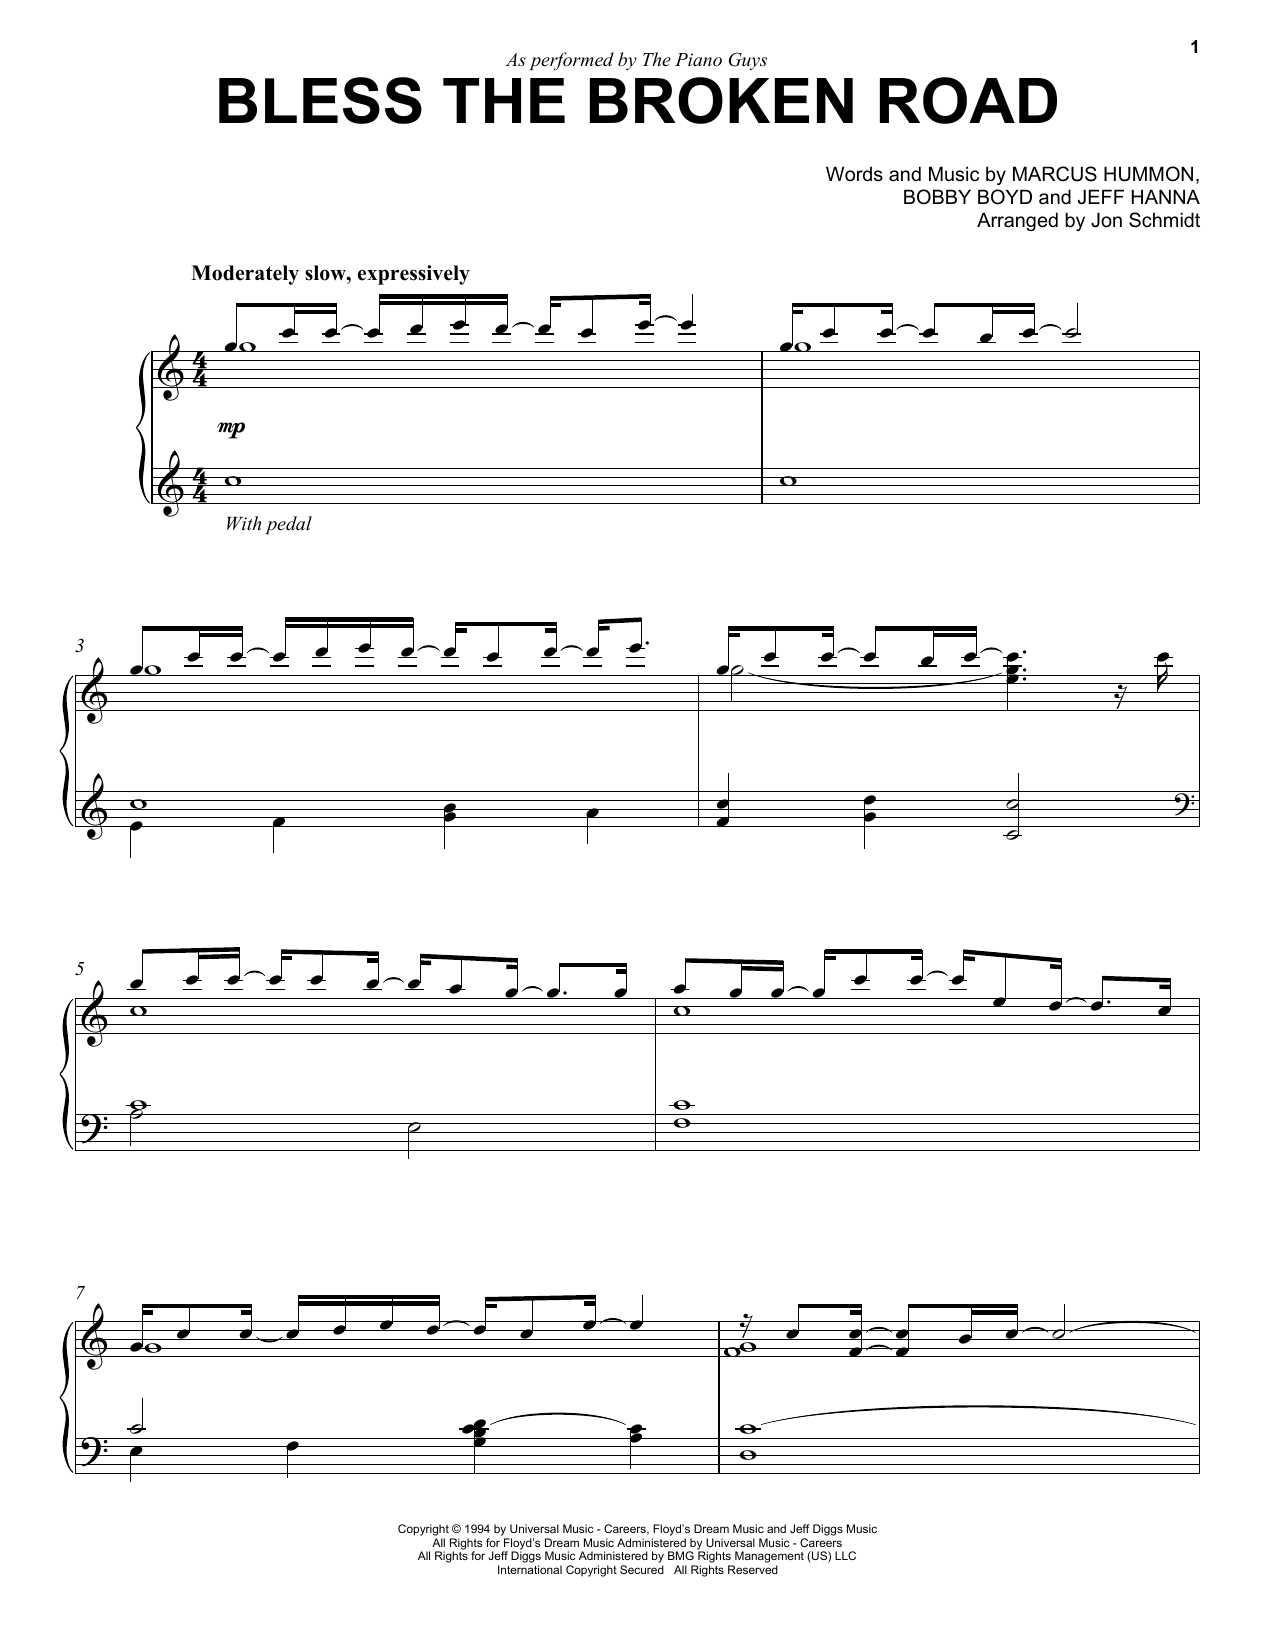 Download The Piano Guys Bless The Broken Road Sheet Music